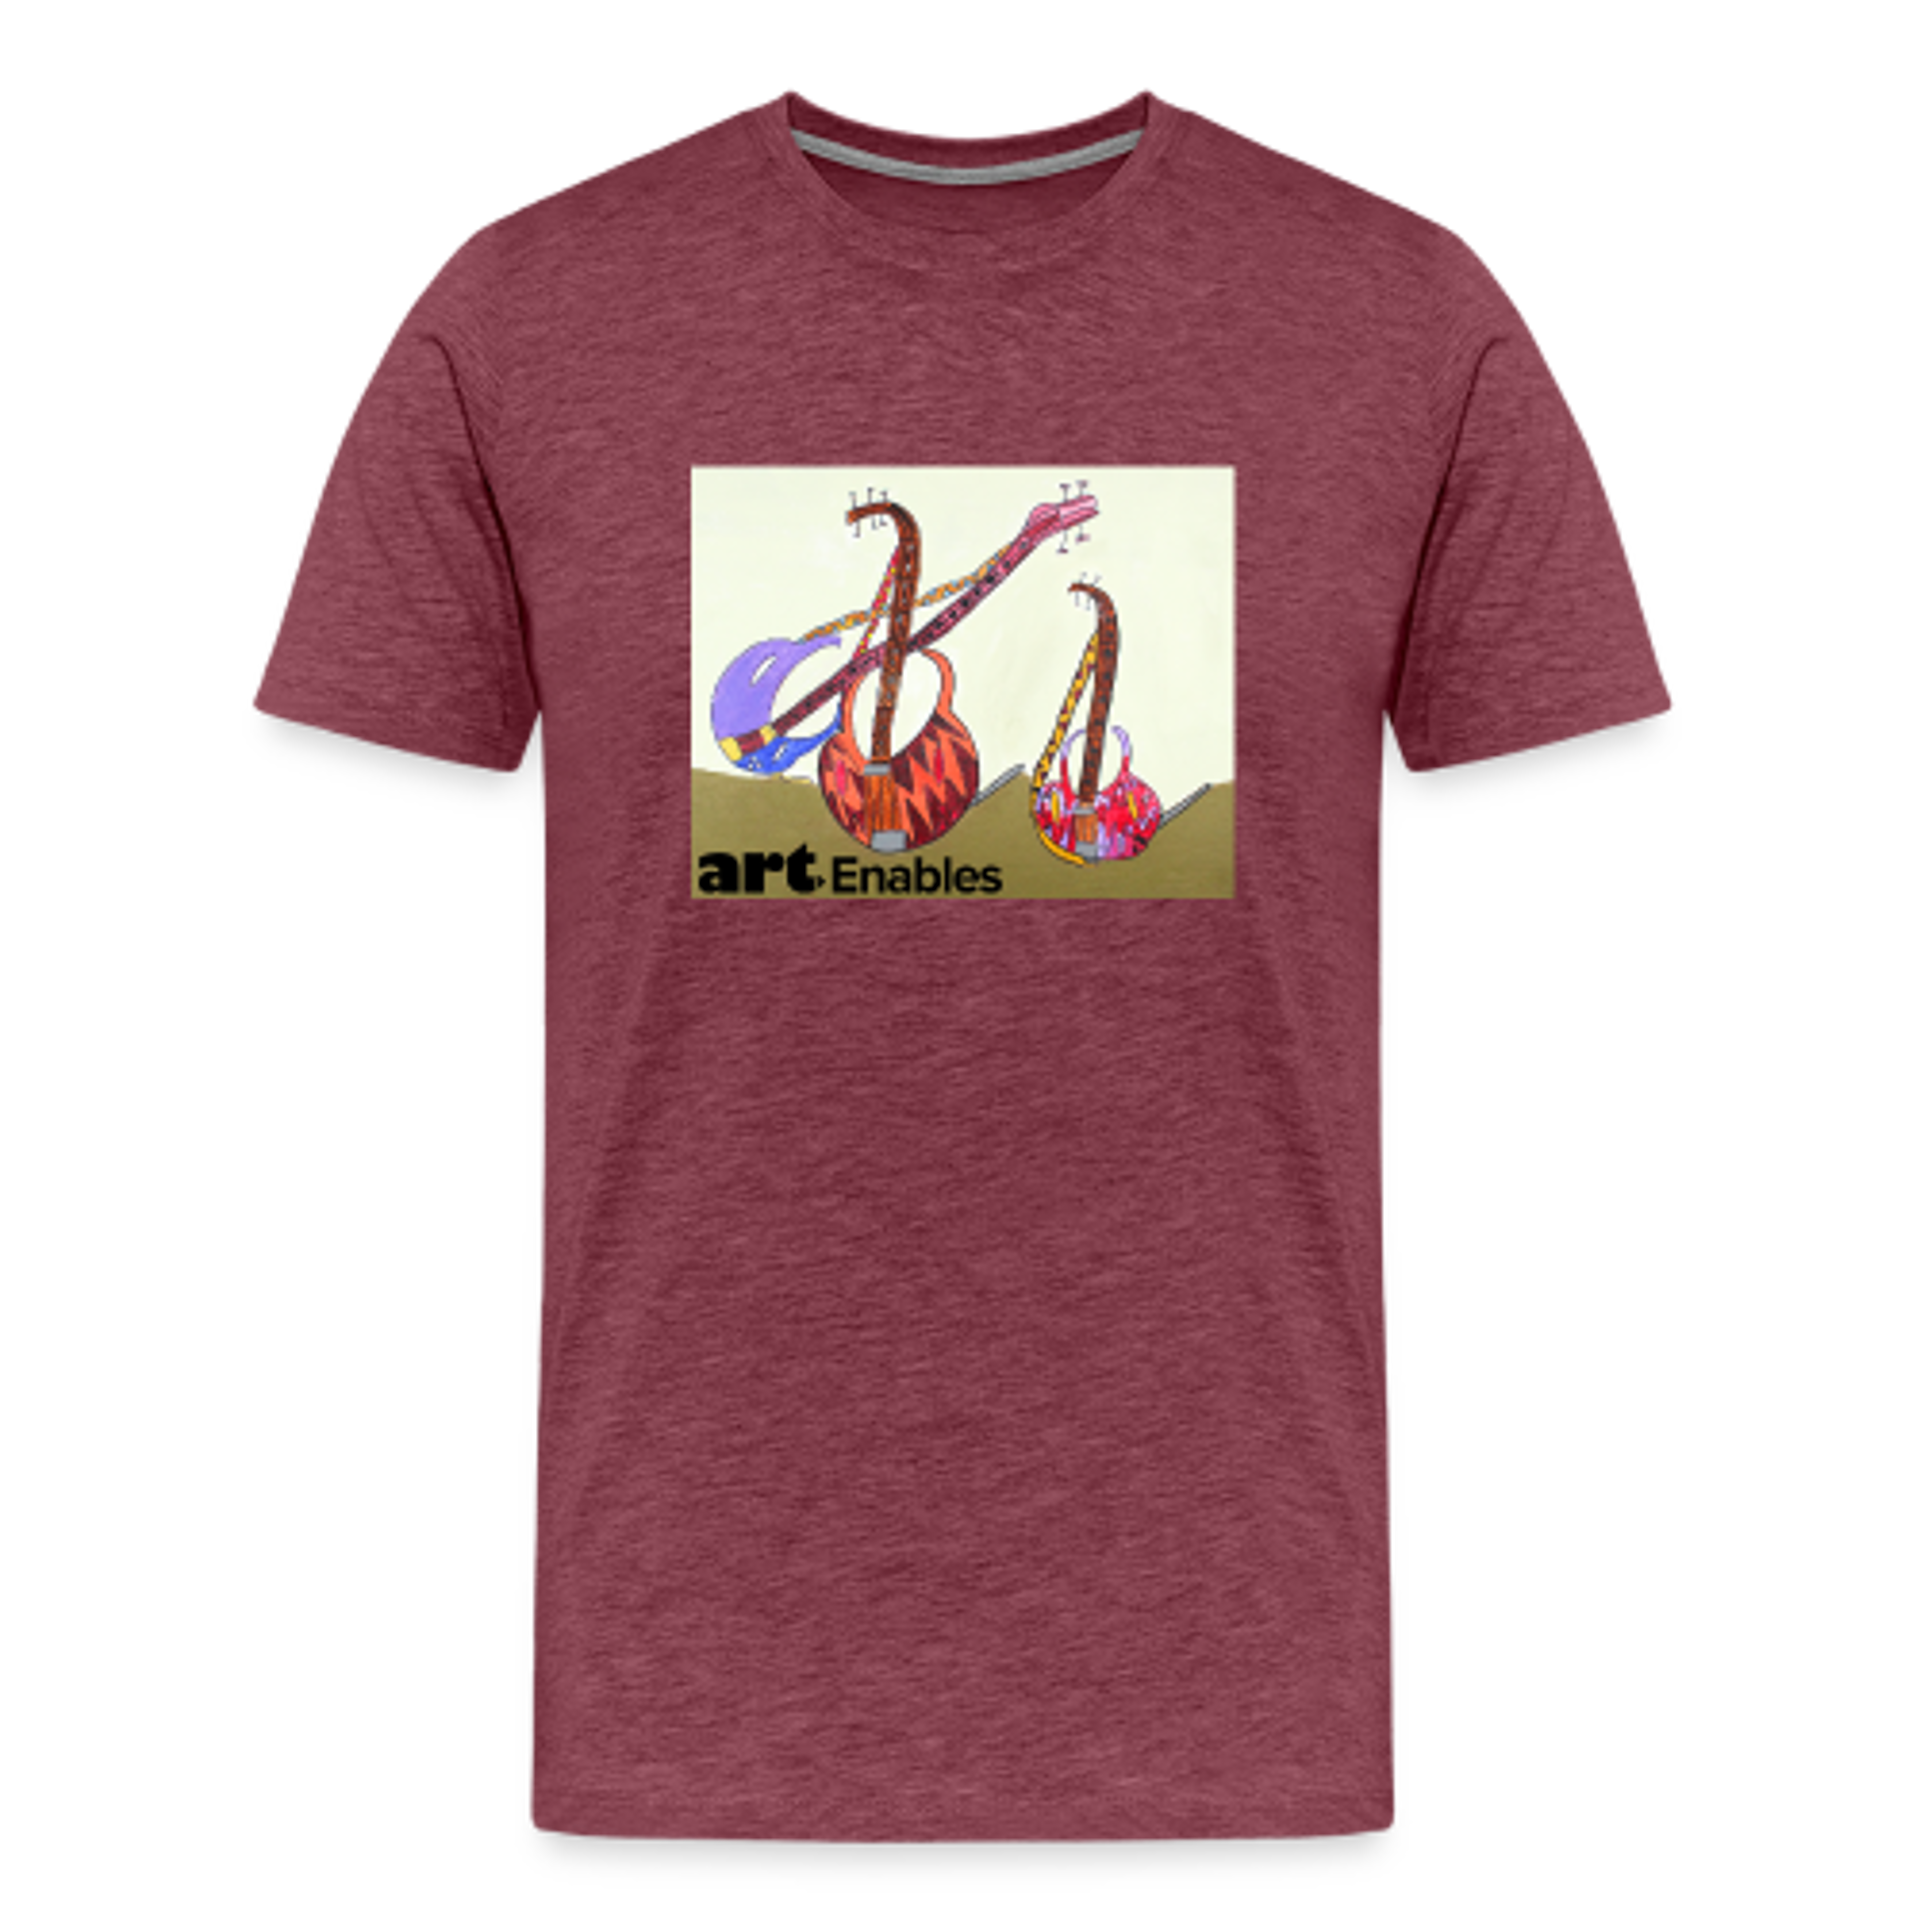 Men's T-shirt (artwork by Max Poznerzon) Small - heather burgundy by Art Enables Merchandise